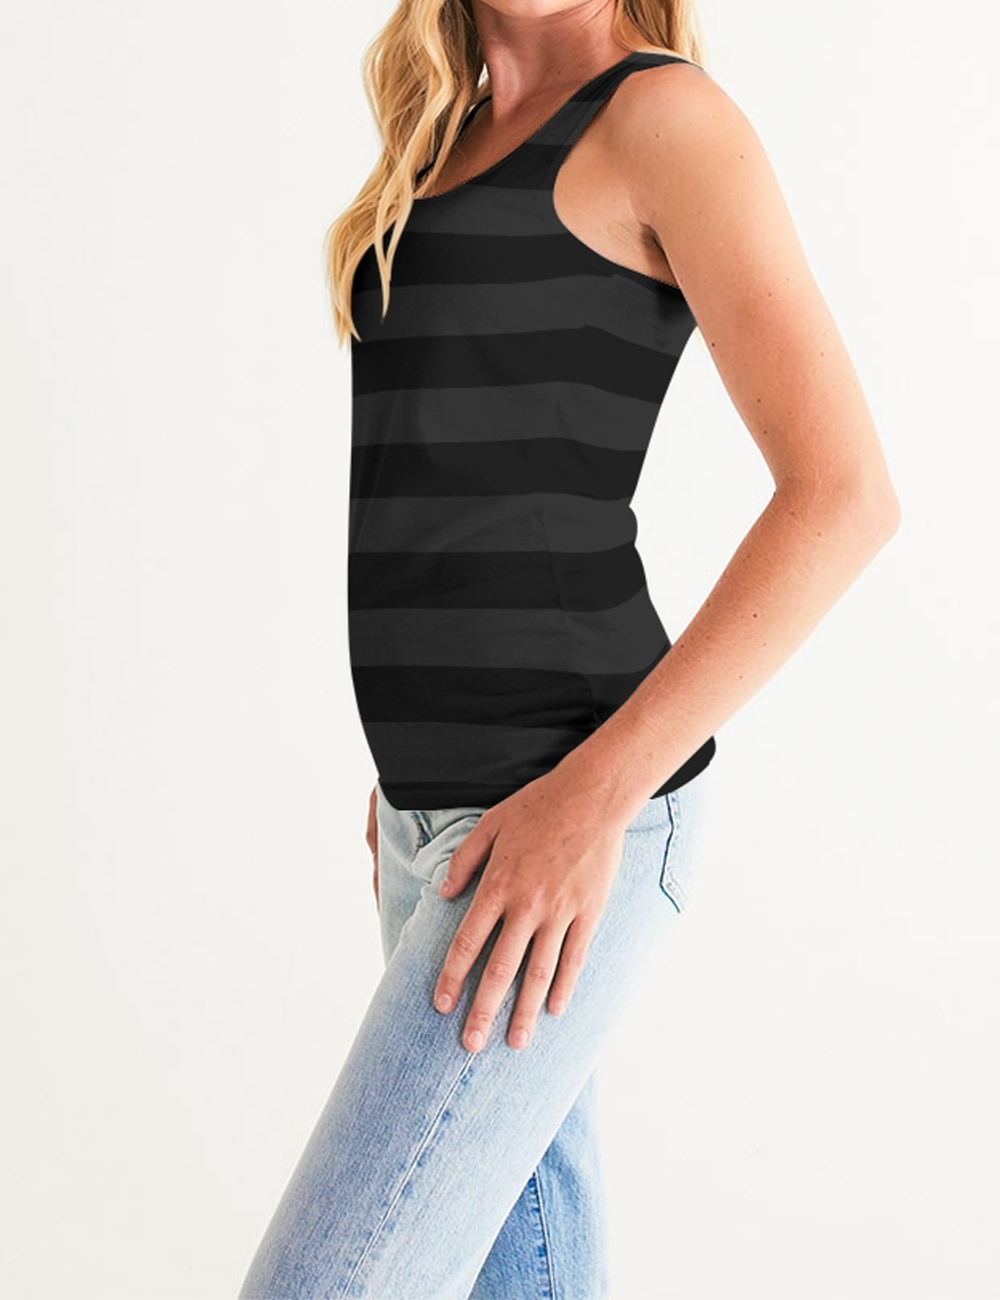 Dark Grey Lines | Women's Fitted Sublimated Tank Top OniTakai